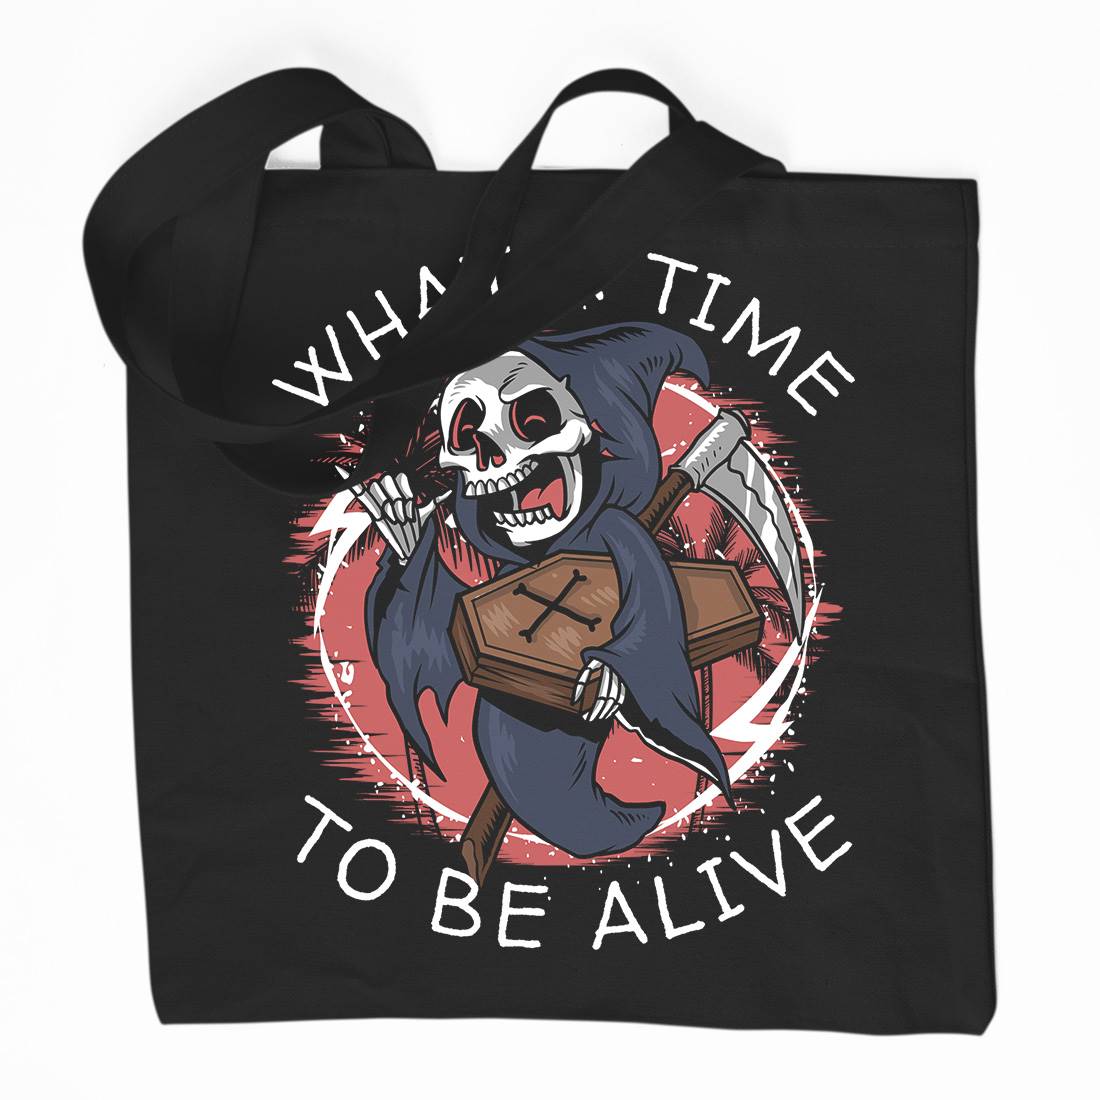 What A Time To Be Alive Organic Premium Cotton Tote Bag Funny D096